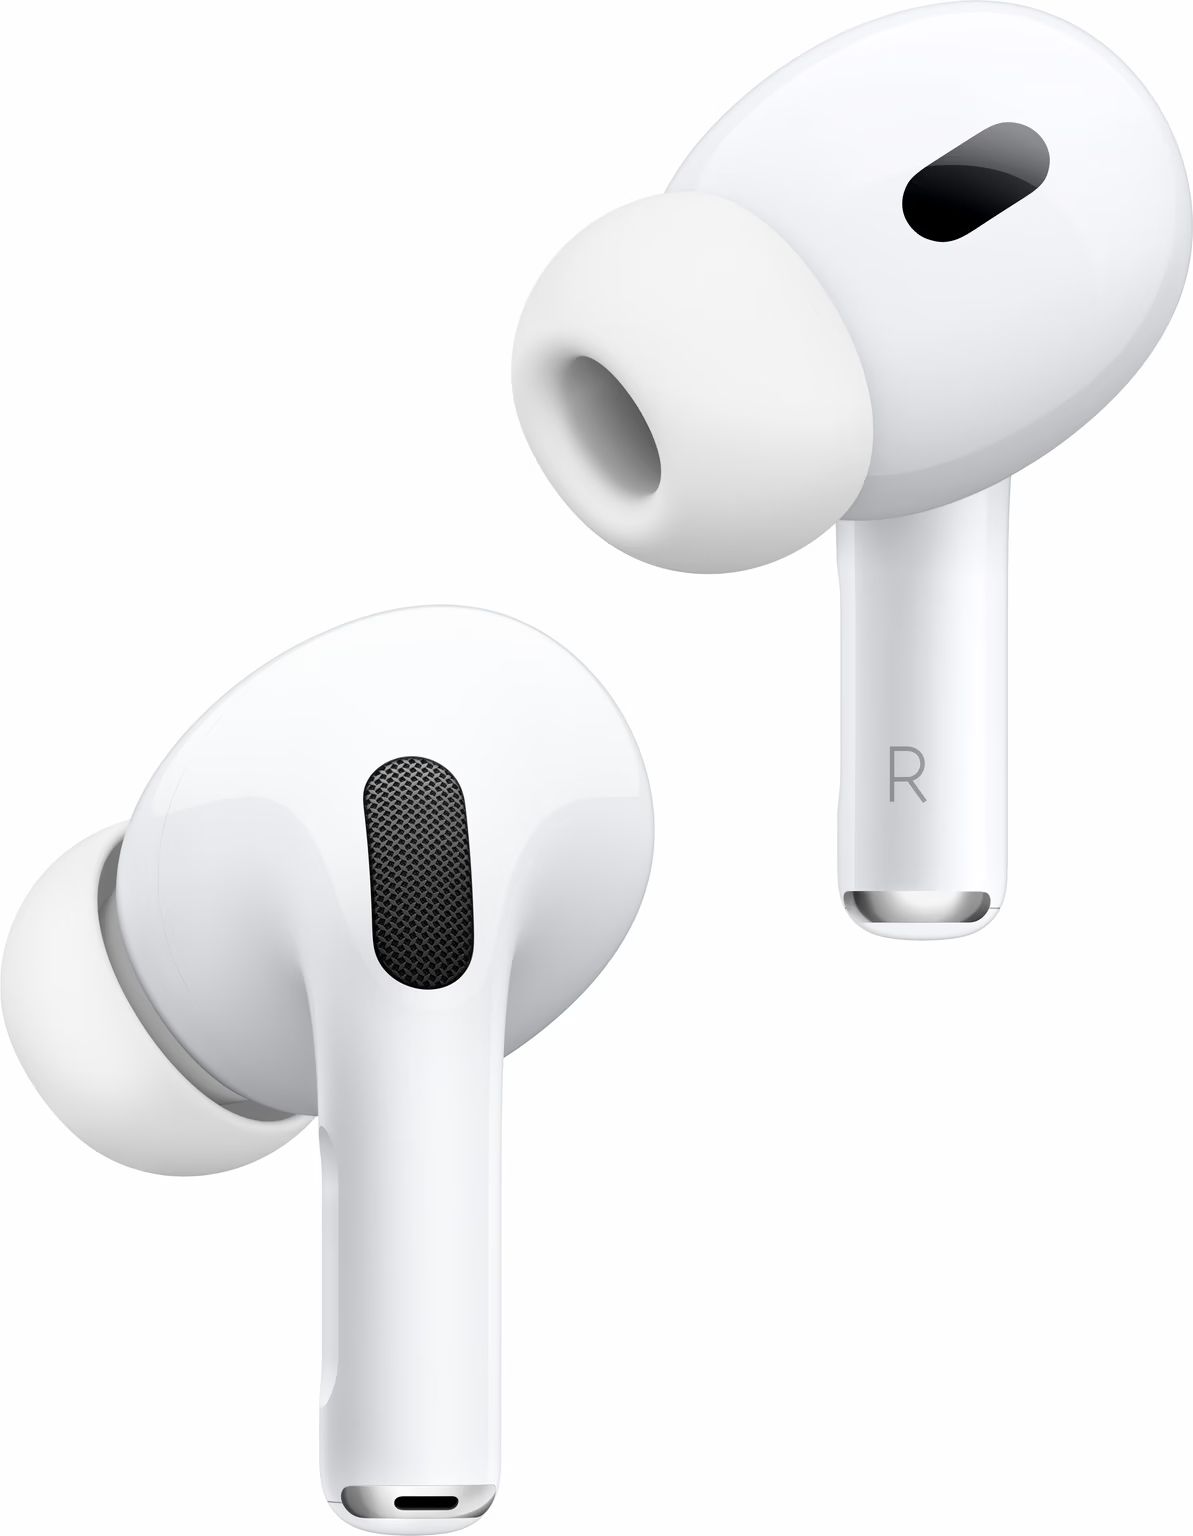 A pair of white airpods pro earbuds on a white background.